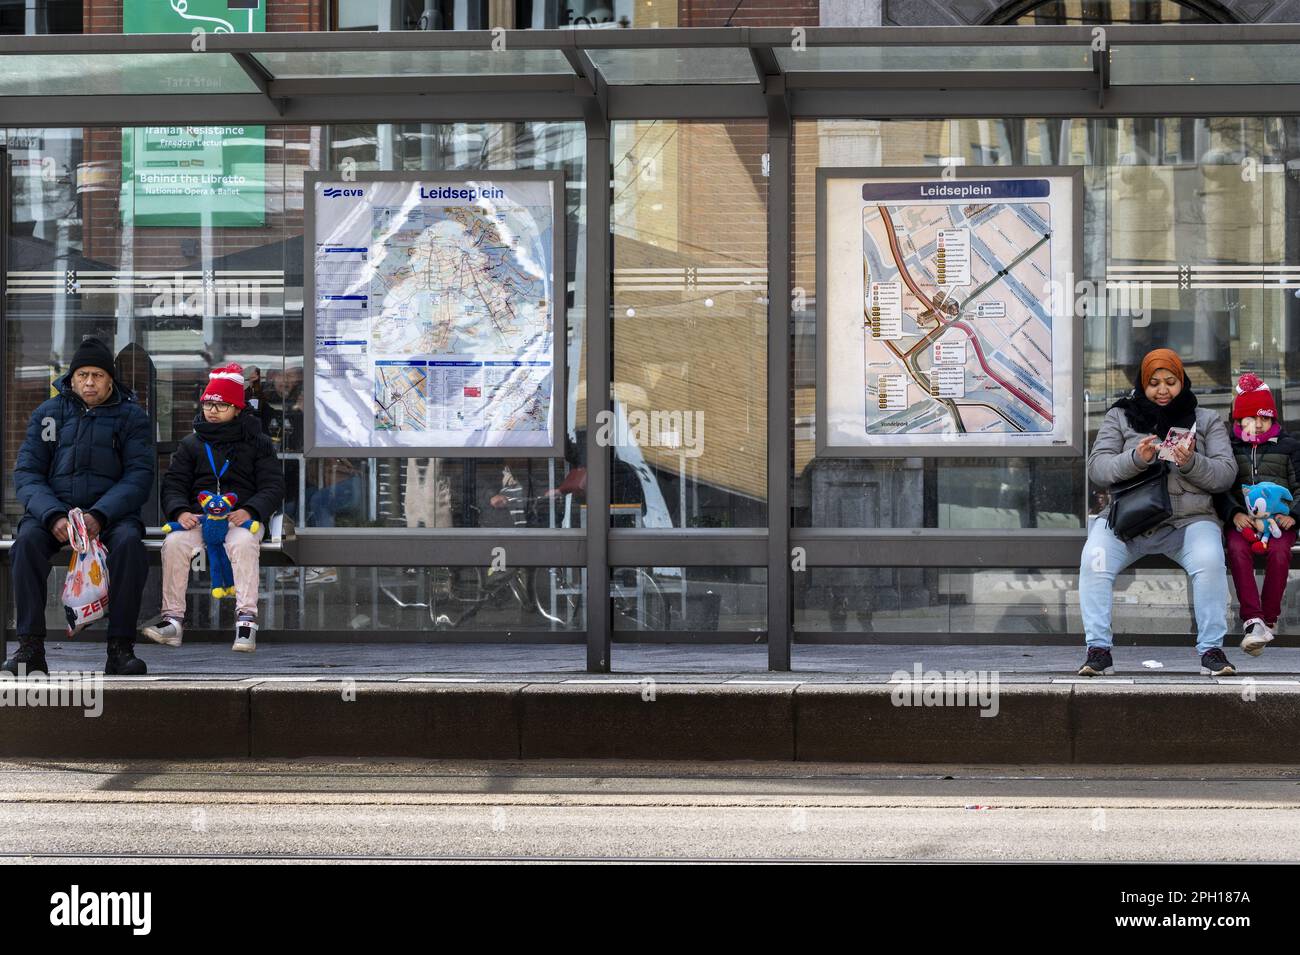 AMSTERDAM - Travelers wait for the tram in the center of Amsterdam. Public transport in the capital is being overhauled because the number of travelers has decreased due to the corona crisis. ANP EVERT ELZINGA netherlands out - belgium out Stock Photo